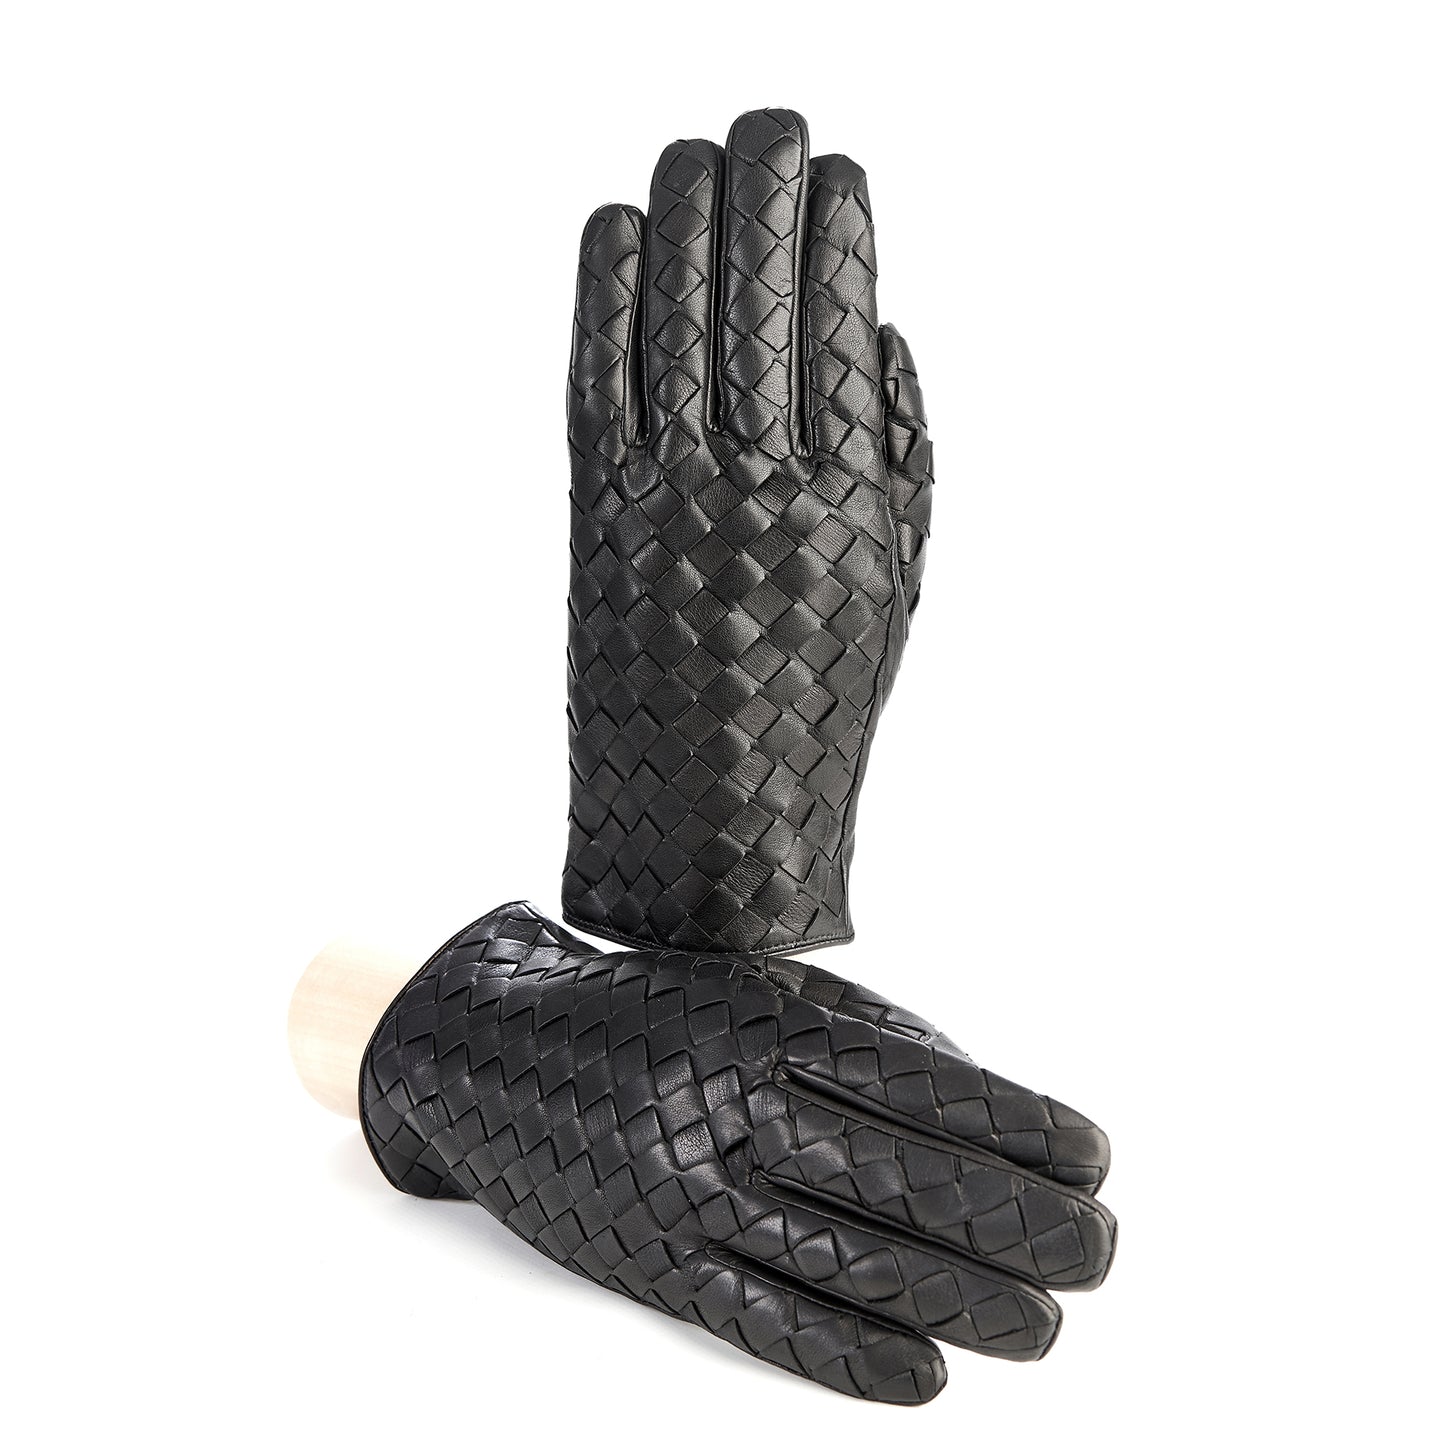 Men's black leather gloves with woven panel top wool lined